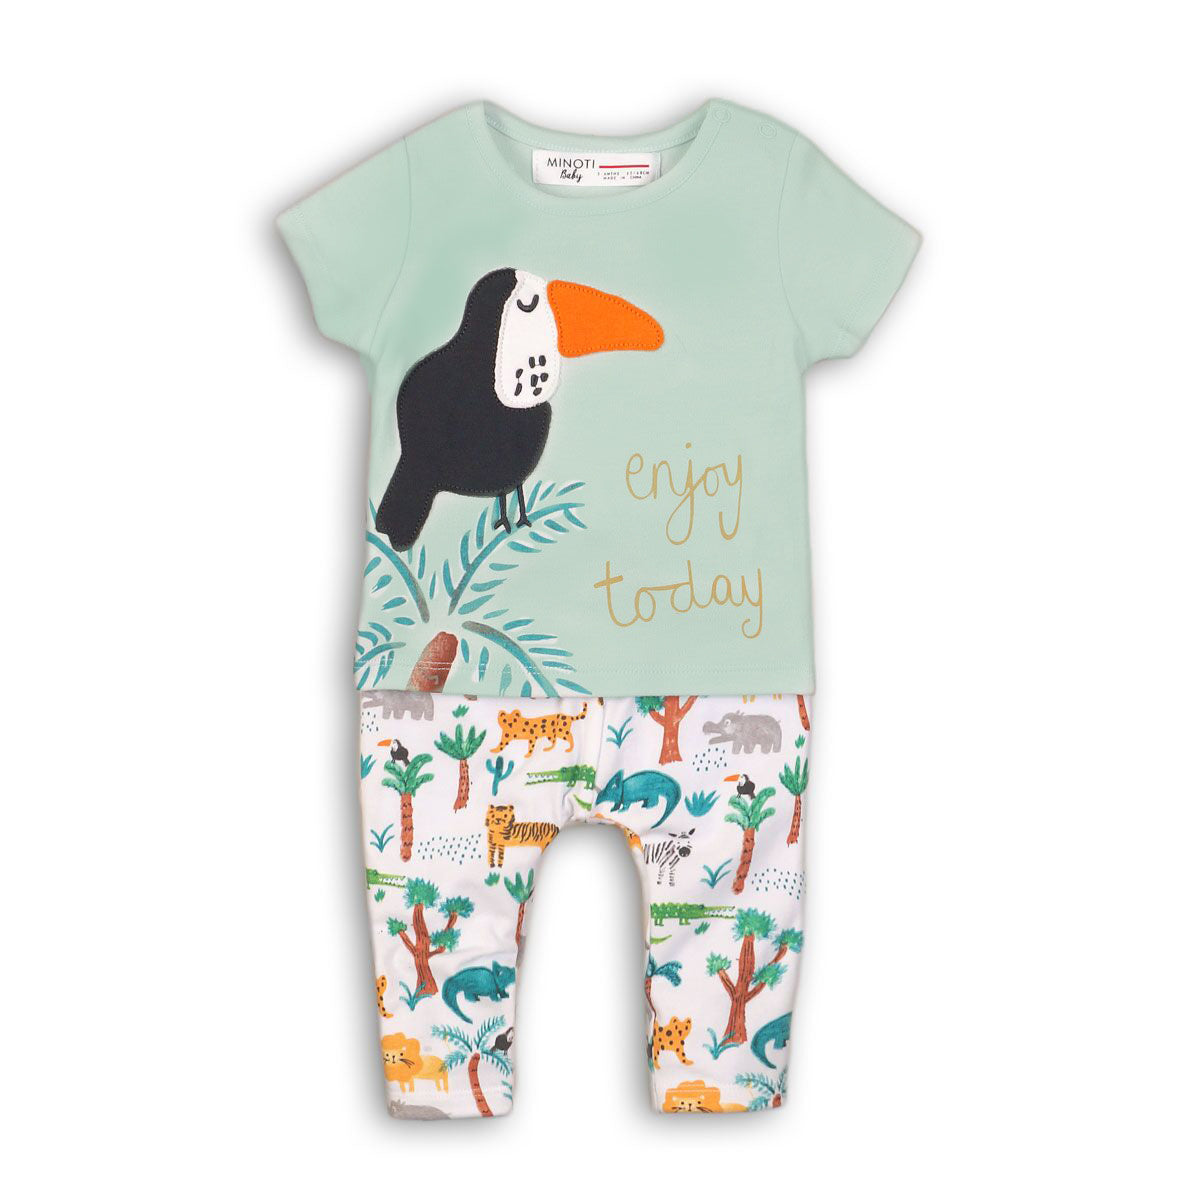 Jungle Theme Baby T-shirt and Pants